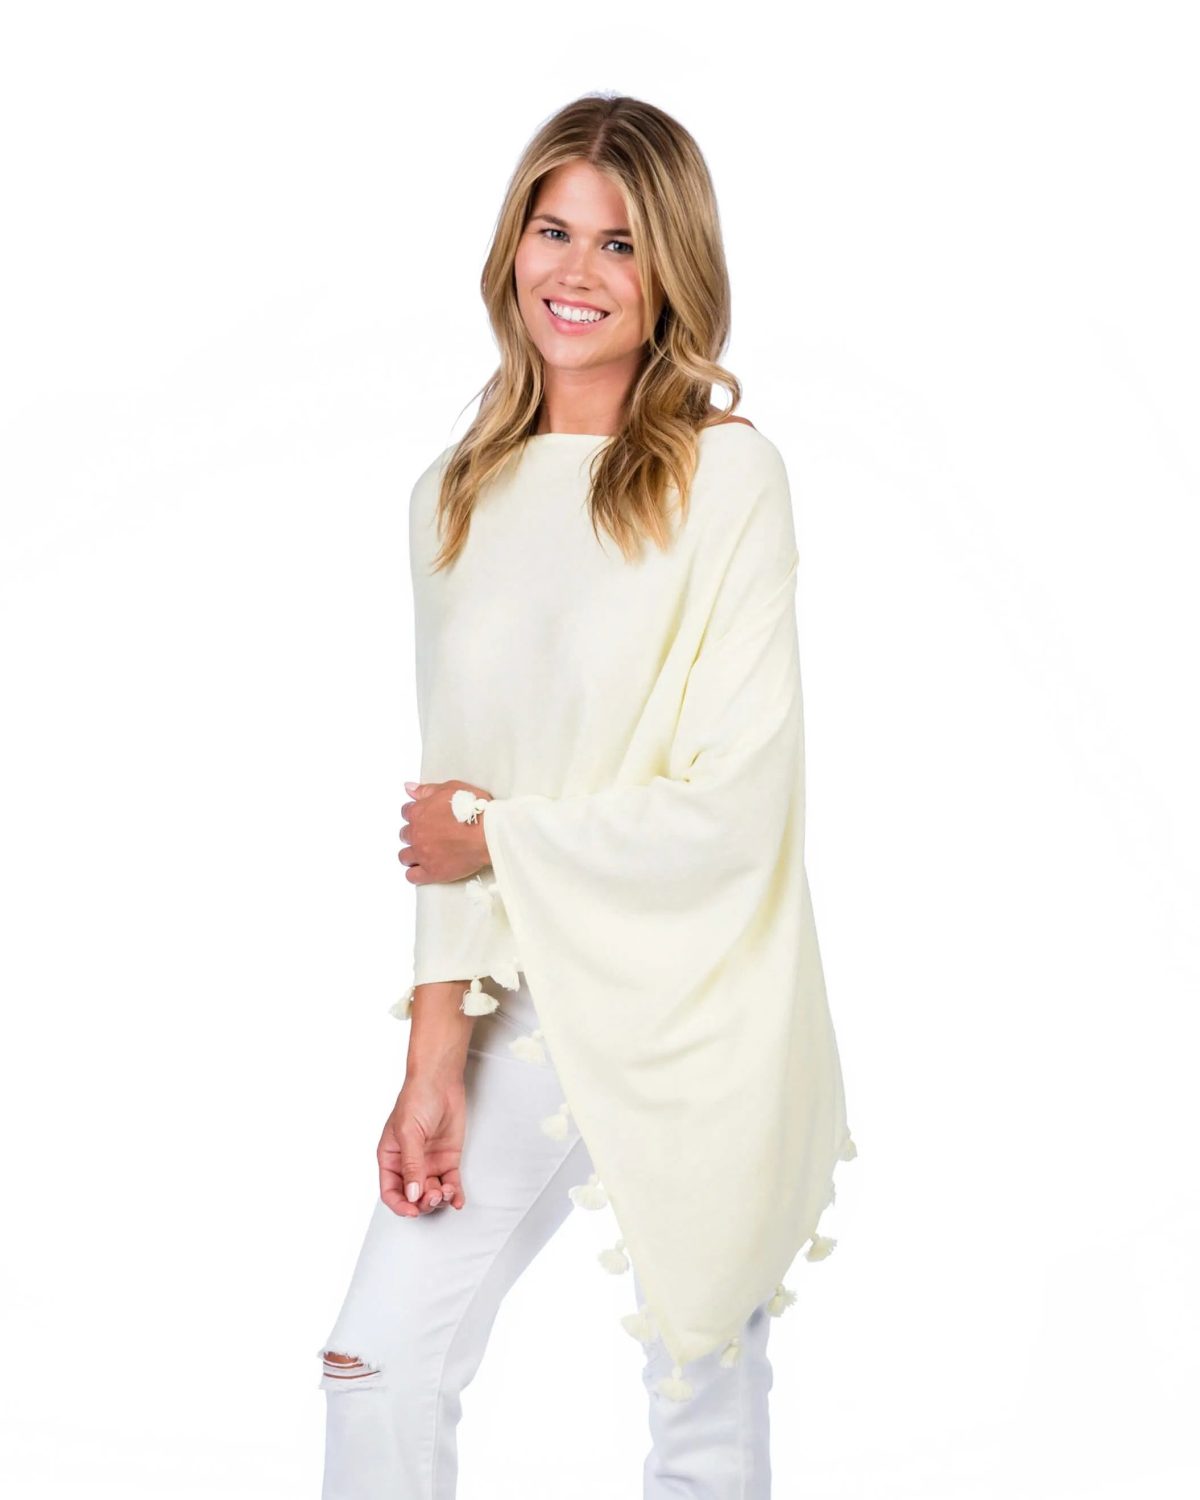 Alashan Cashmere LSC833 Lemon Ice Cotton Cashmere Topper with Tassels | Ooh! Ooh! Shoes woman's clothing and shoe boutique naples and mashpee